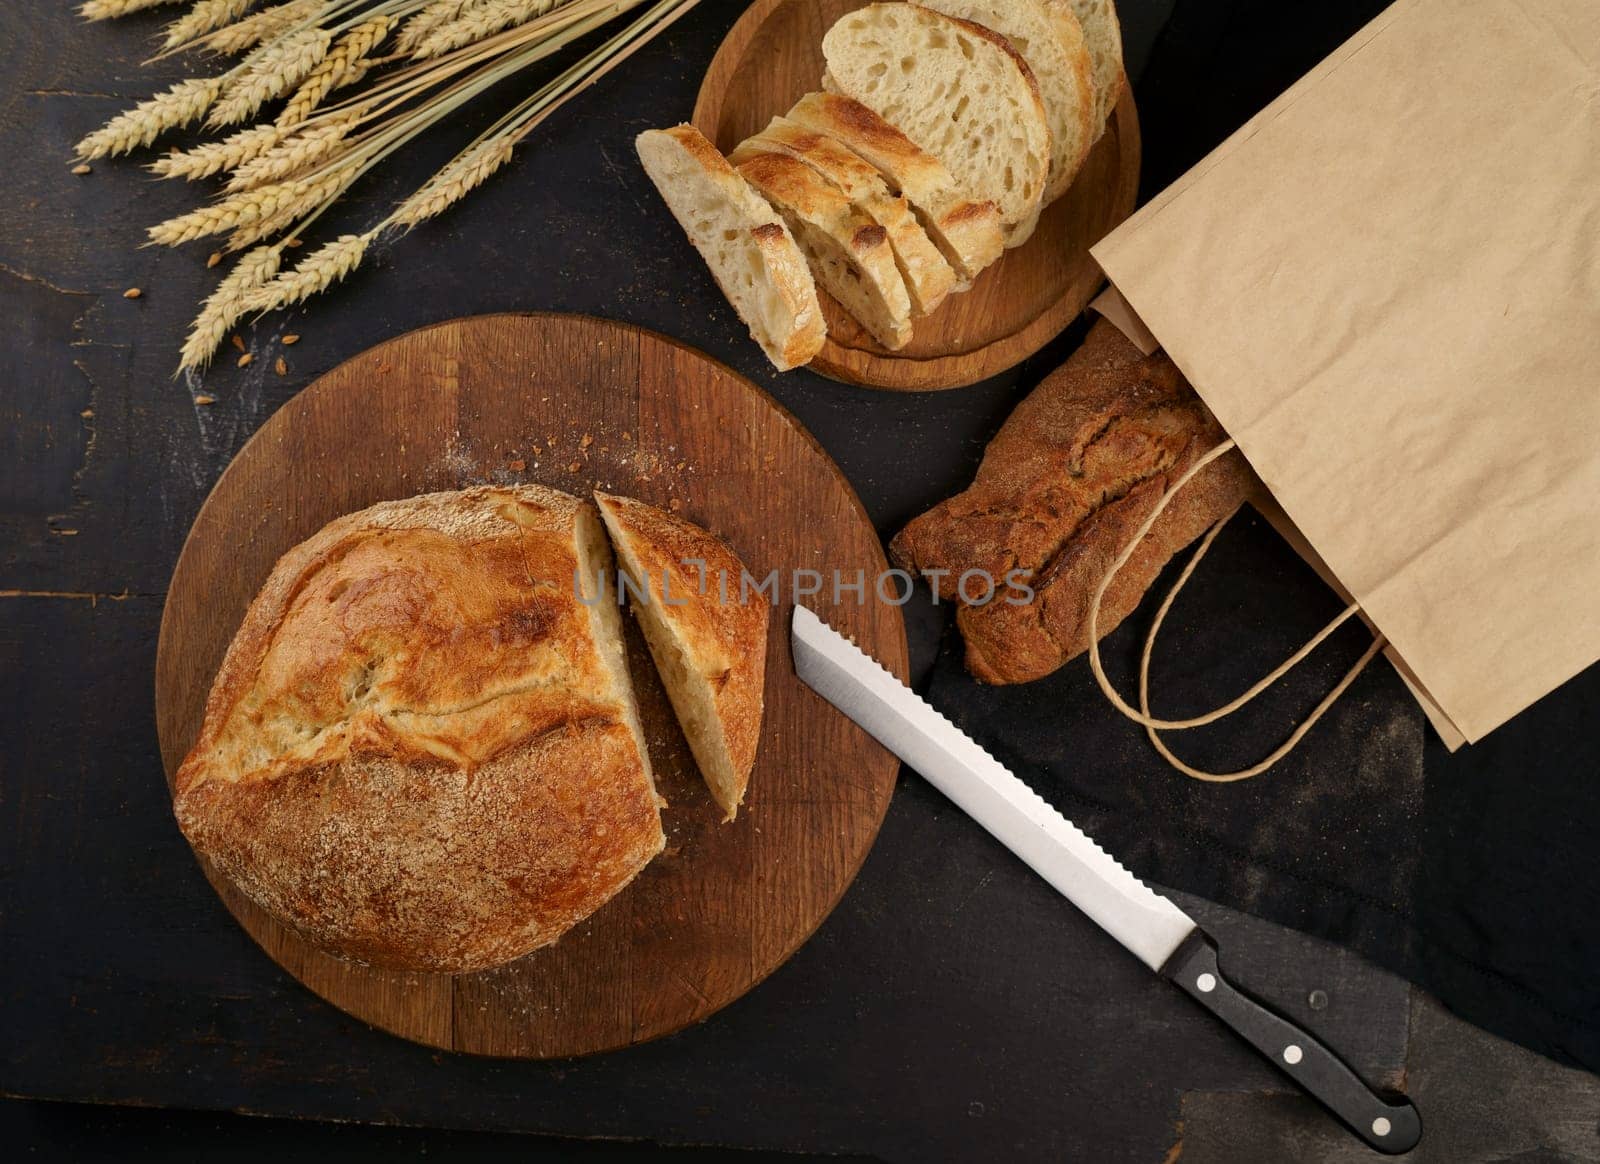 hopped grain bread put on kitchen wood plate with knife for cut. Fresh bread on table close-up. Fresh bread on the kitchen table. The healthy eating and traditional bakery concept. Top viev. by aprilphoto